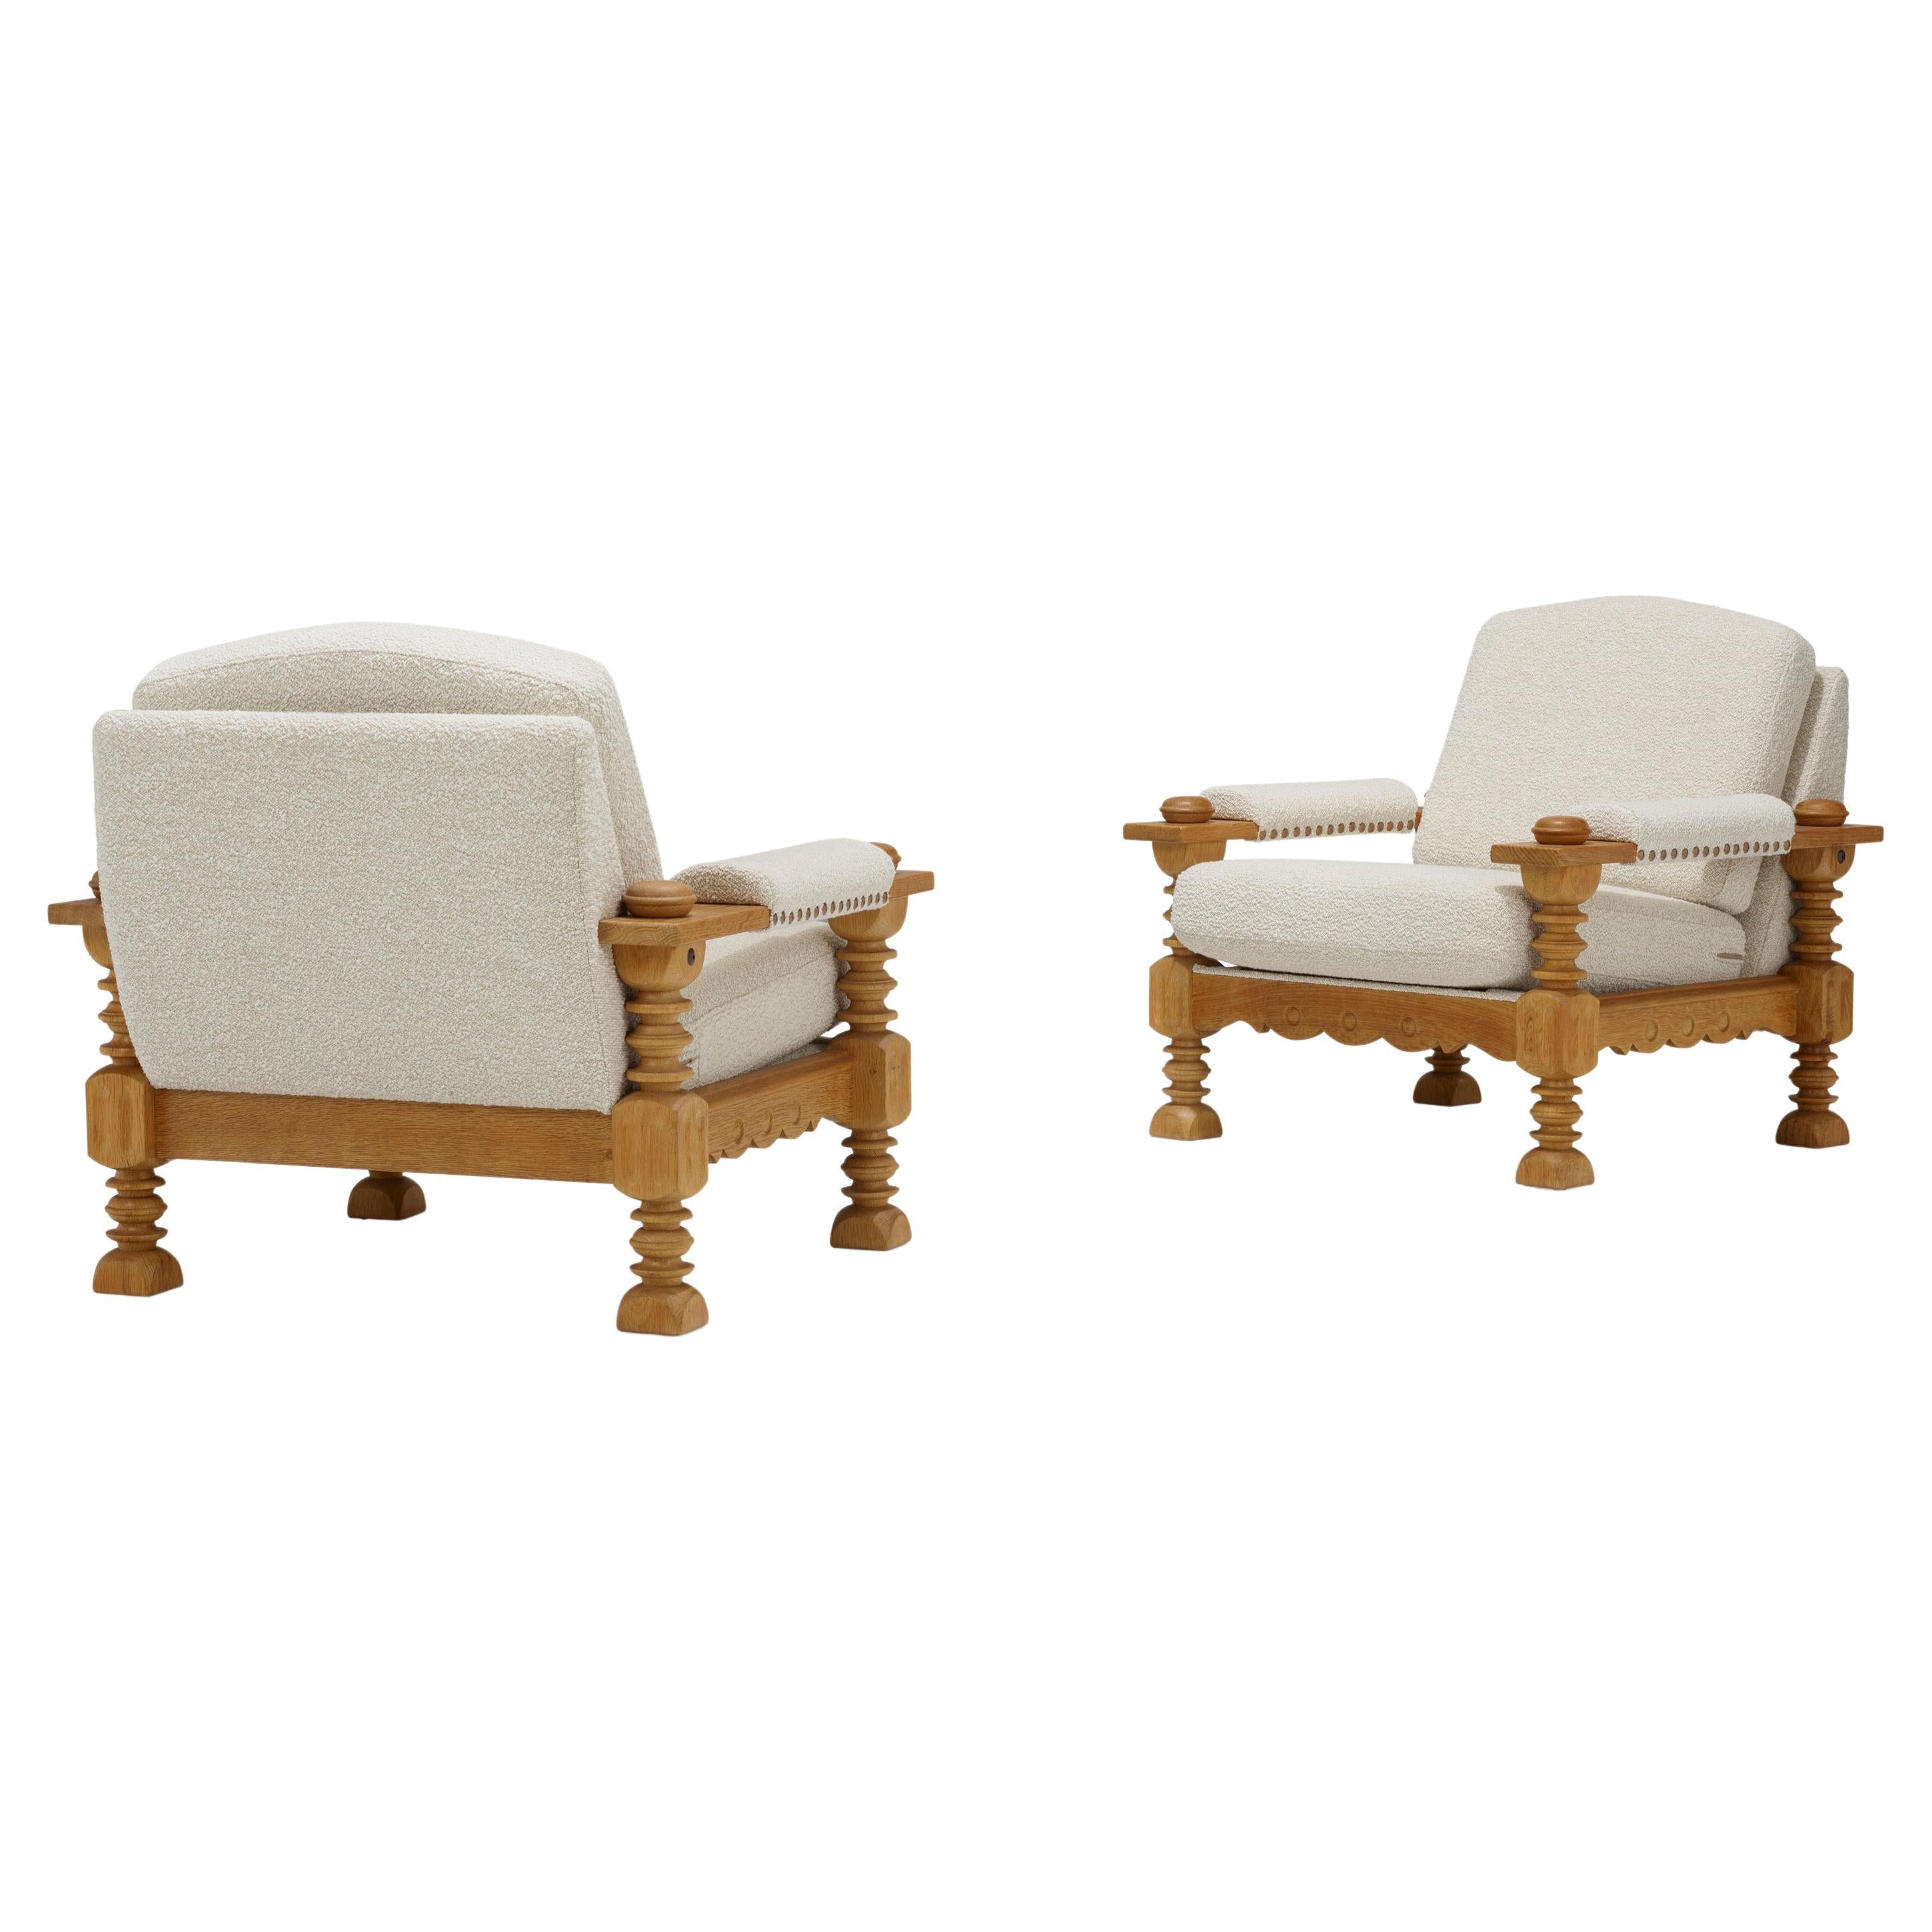 A pair of large sculptural Danish mid-century lounge chairs featuring finely constructed oak frames with scalloped aprons on the front and the legs and arm supports comprised of turned stacked discs, beautifully upholstered in off-white boucle